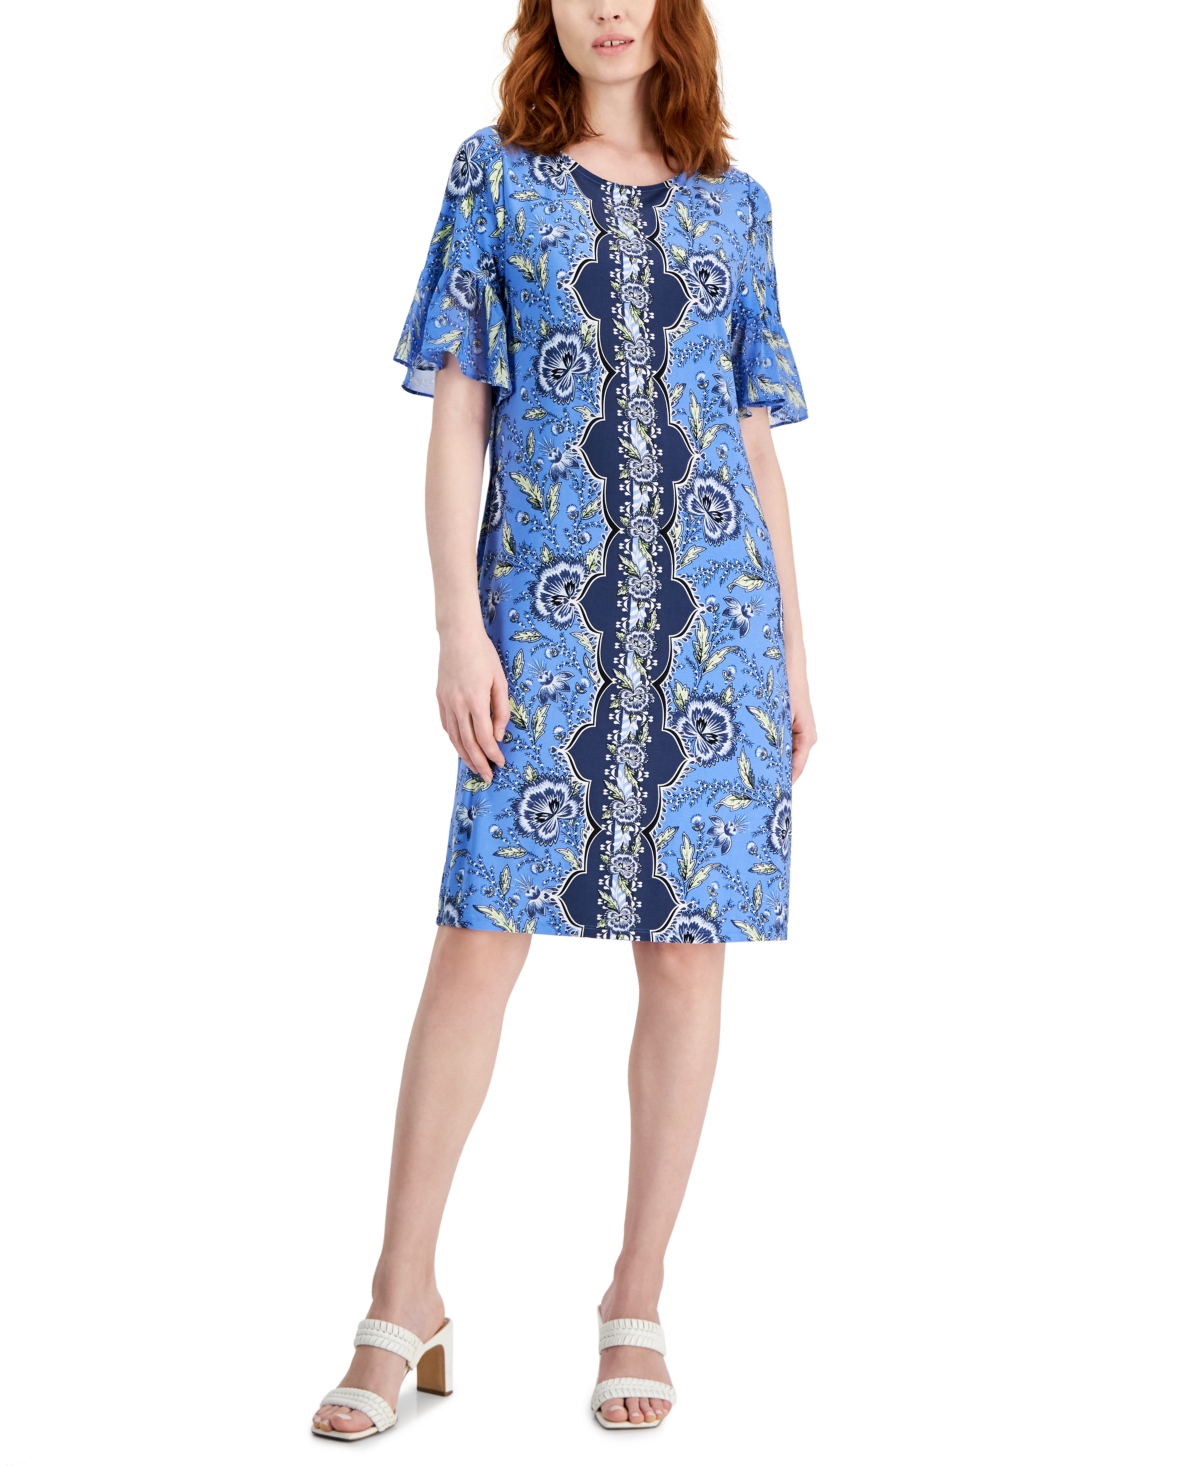 Women's Printed Short Sleeve A-Line Dress, Created for Macy's - Watery Blue Combo